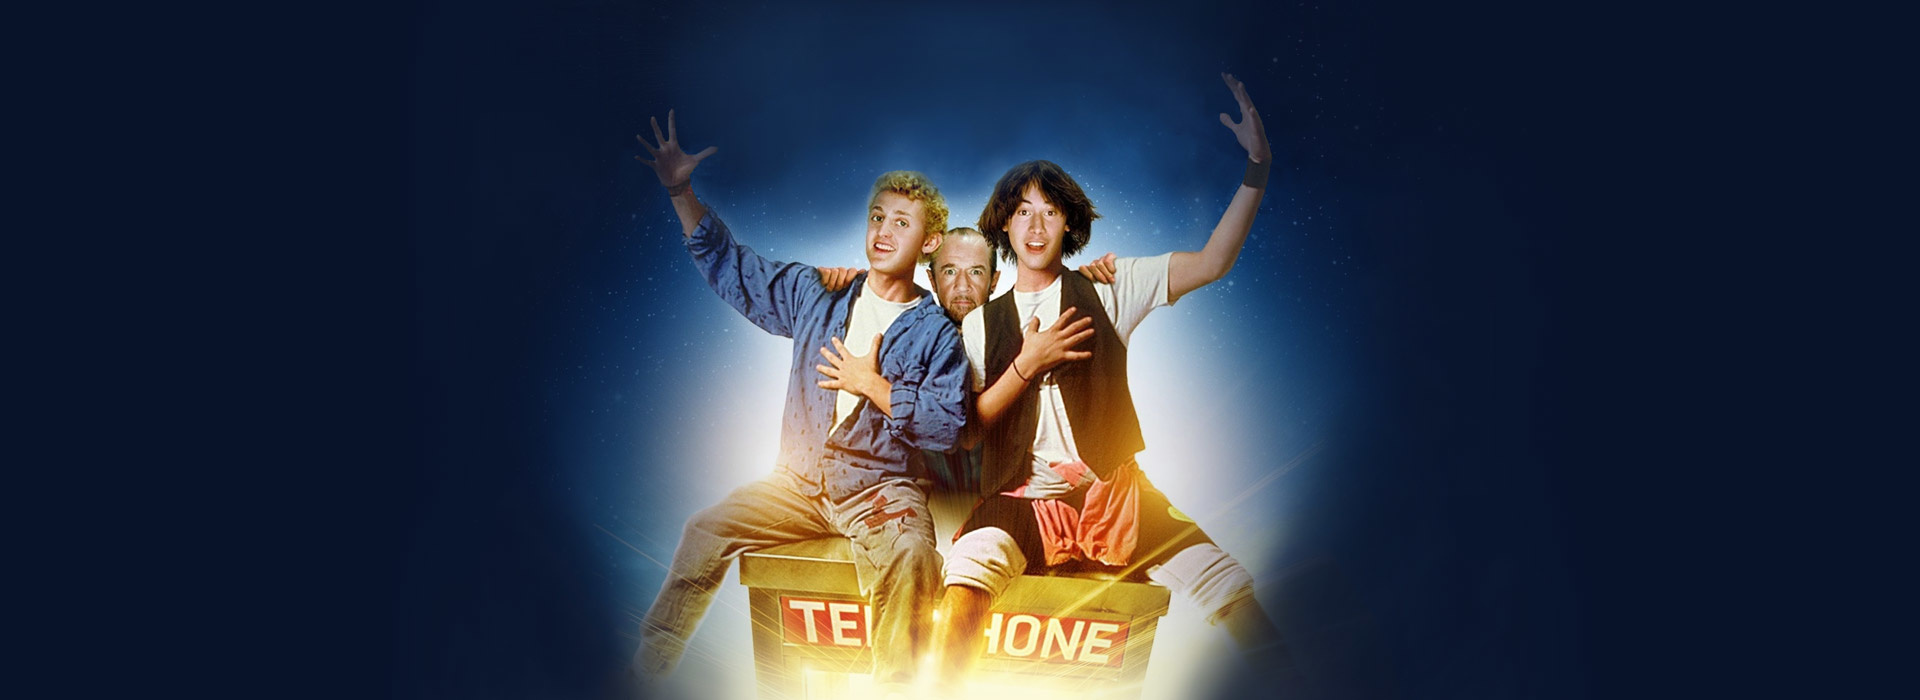 Movie poster Bill & Ted's Excellent Adventure